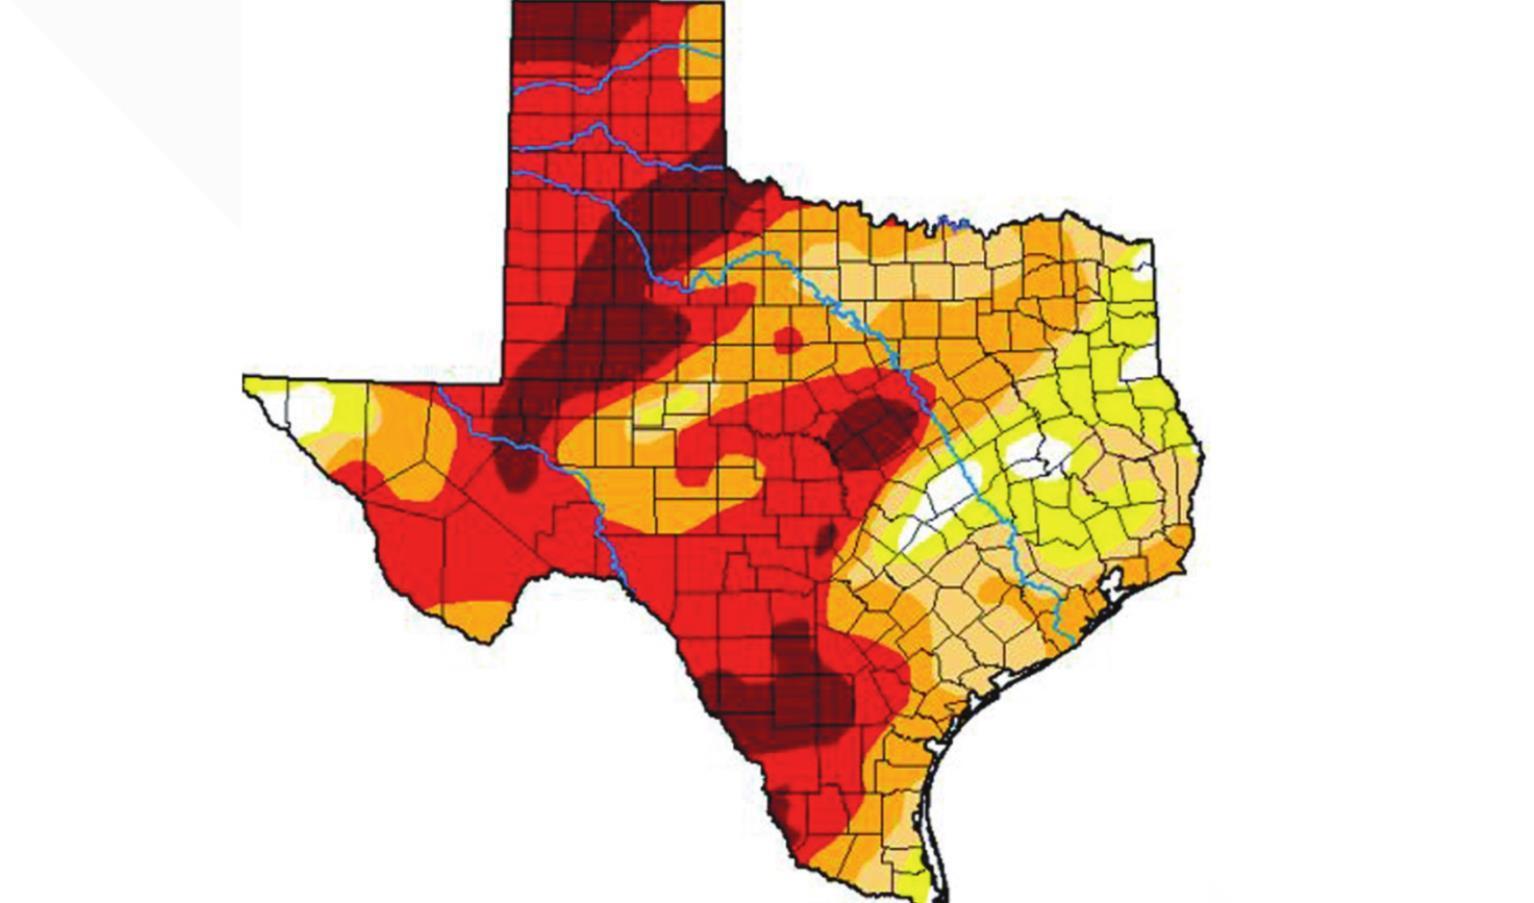 Graphic Source: KVUE.com courtesy of the Drought Monitor.